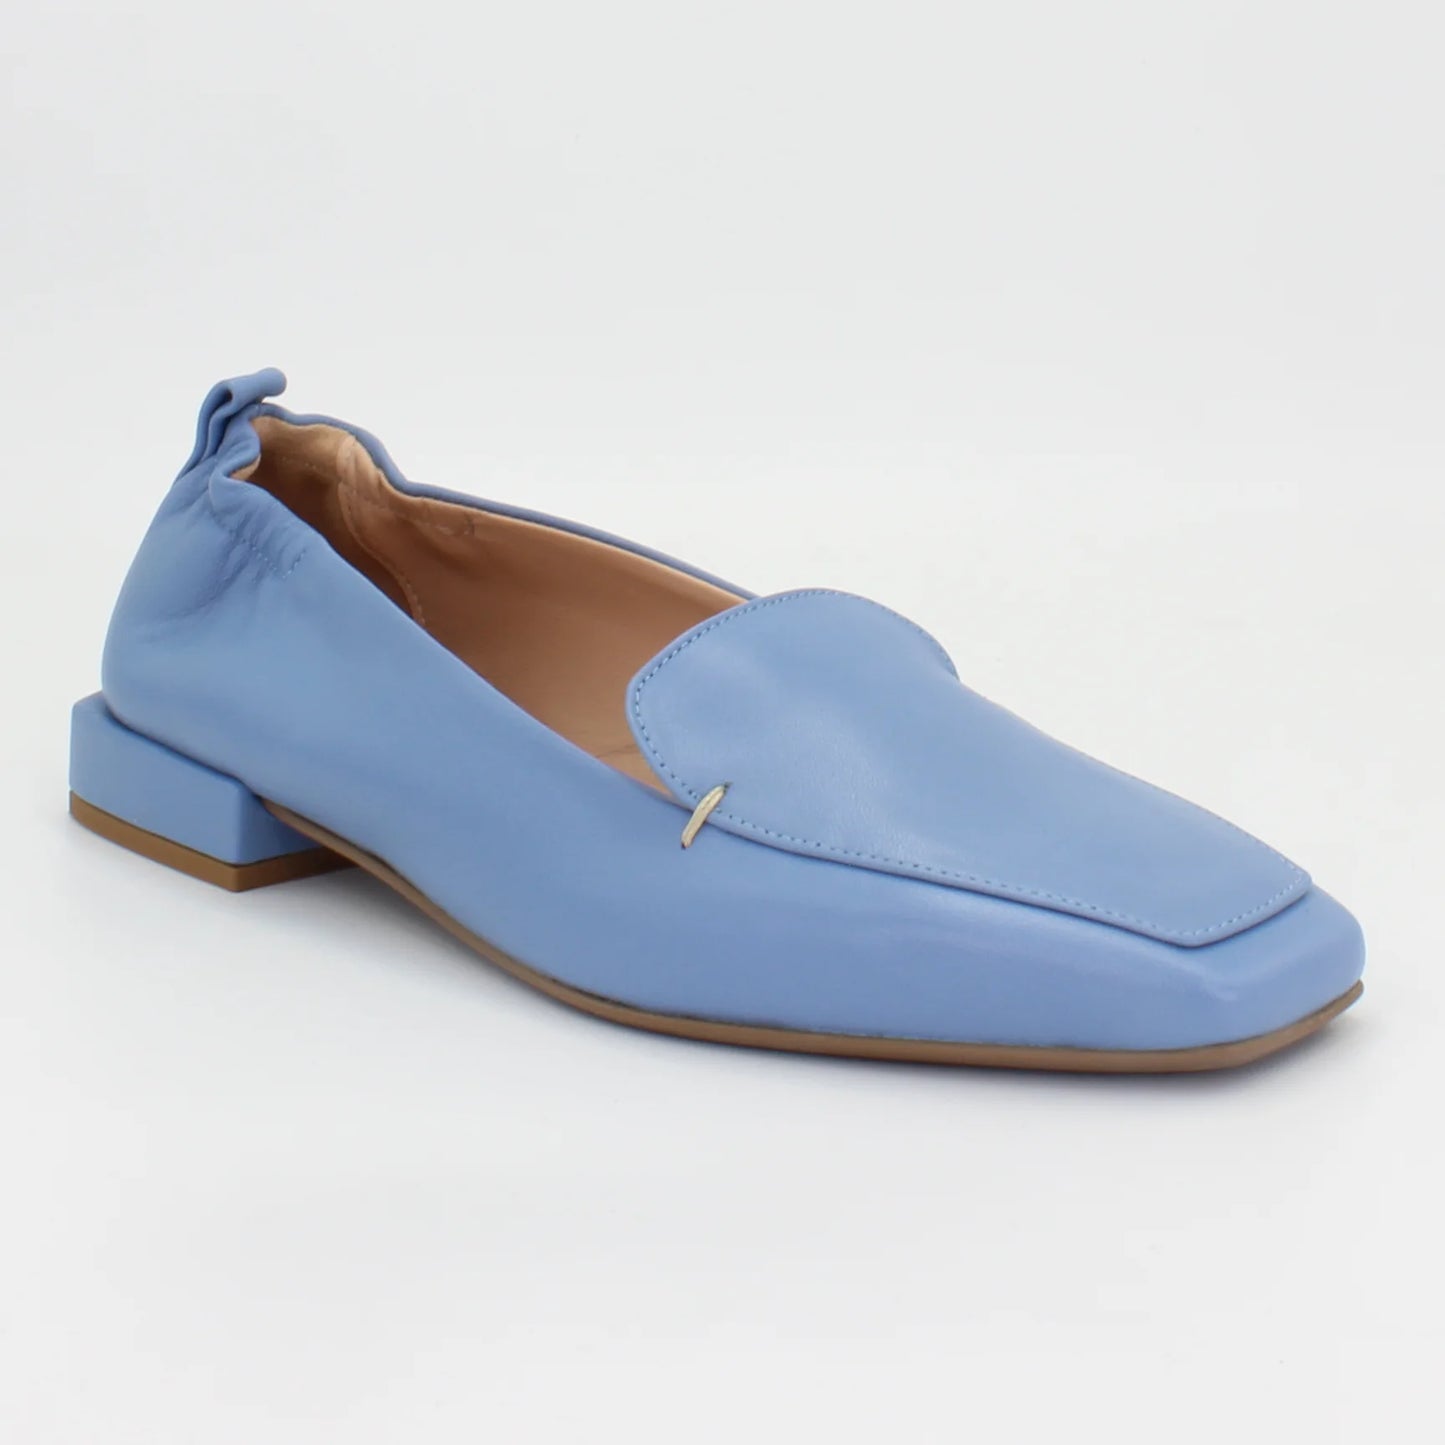 Shop Handmade Italian Leather loafer in denim nappa (DARIA18) or browse our range of hand-made Italian shoes in leather or suede in-store at Aliverti Cape Town, or shop online. We deliver in South Africa & offer multiple payment plans as well as accept multiple safe & secure payment methods.